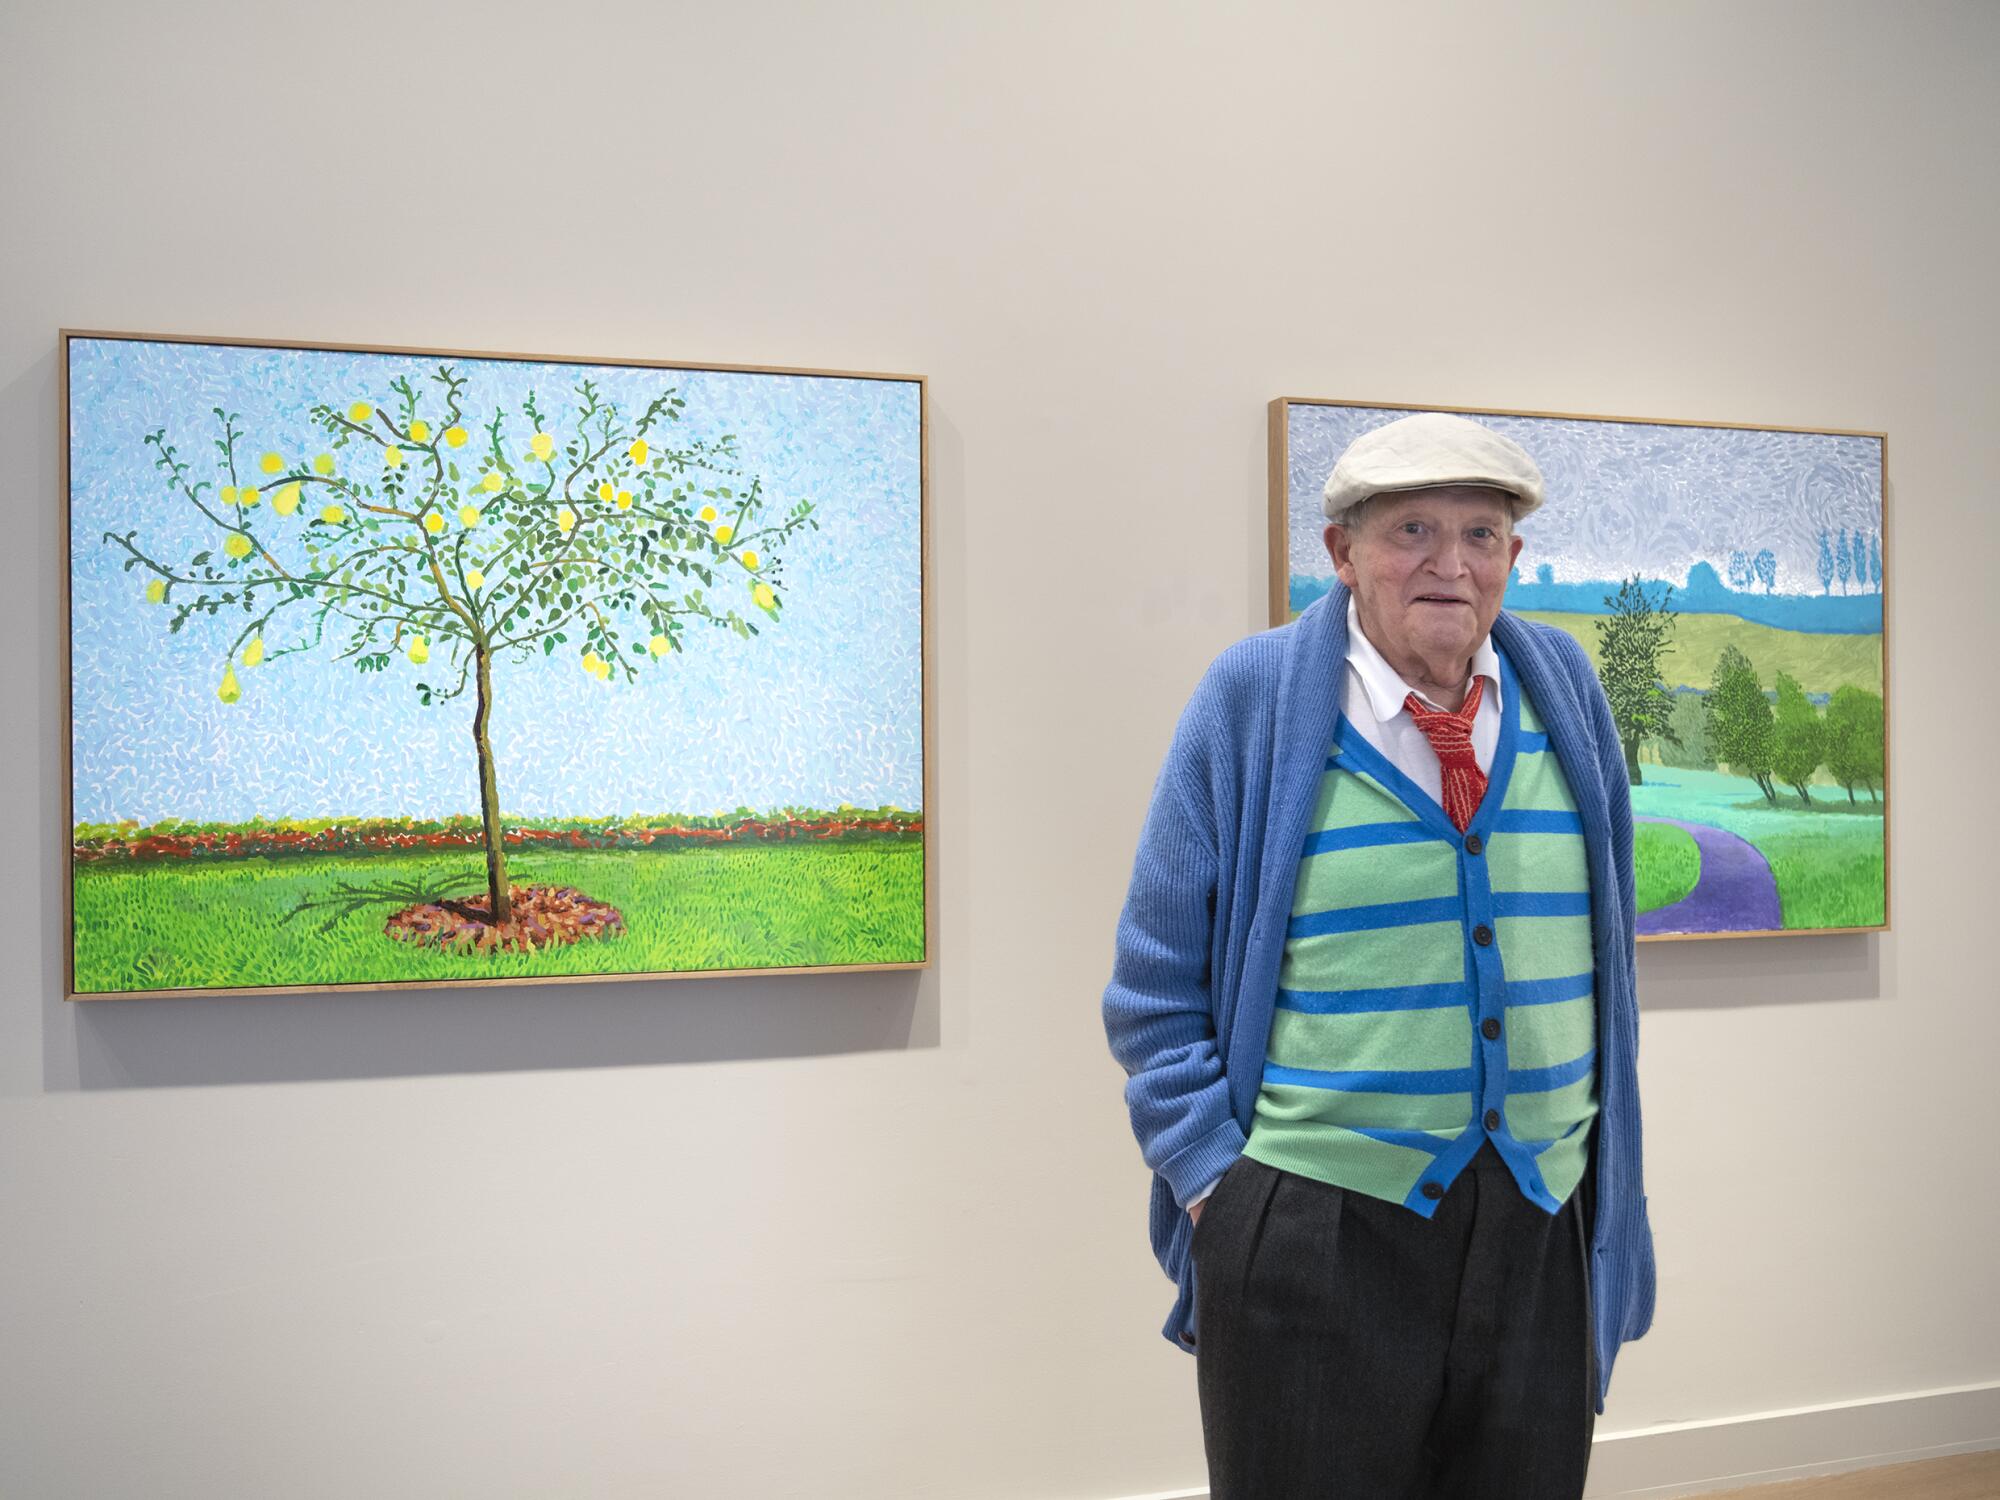 David Hockney, in striped sweater vest and cap, stands in front of two paintings hung on a gallery wall.